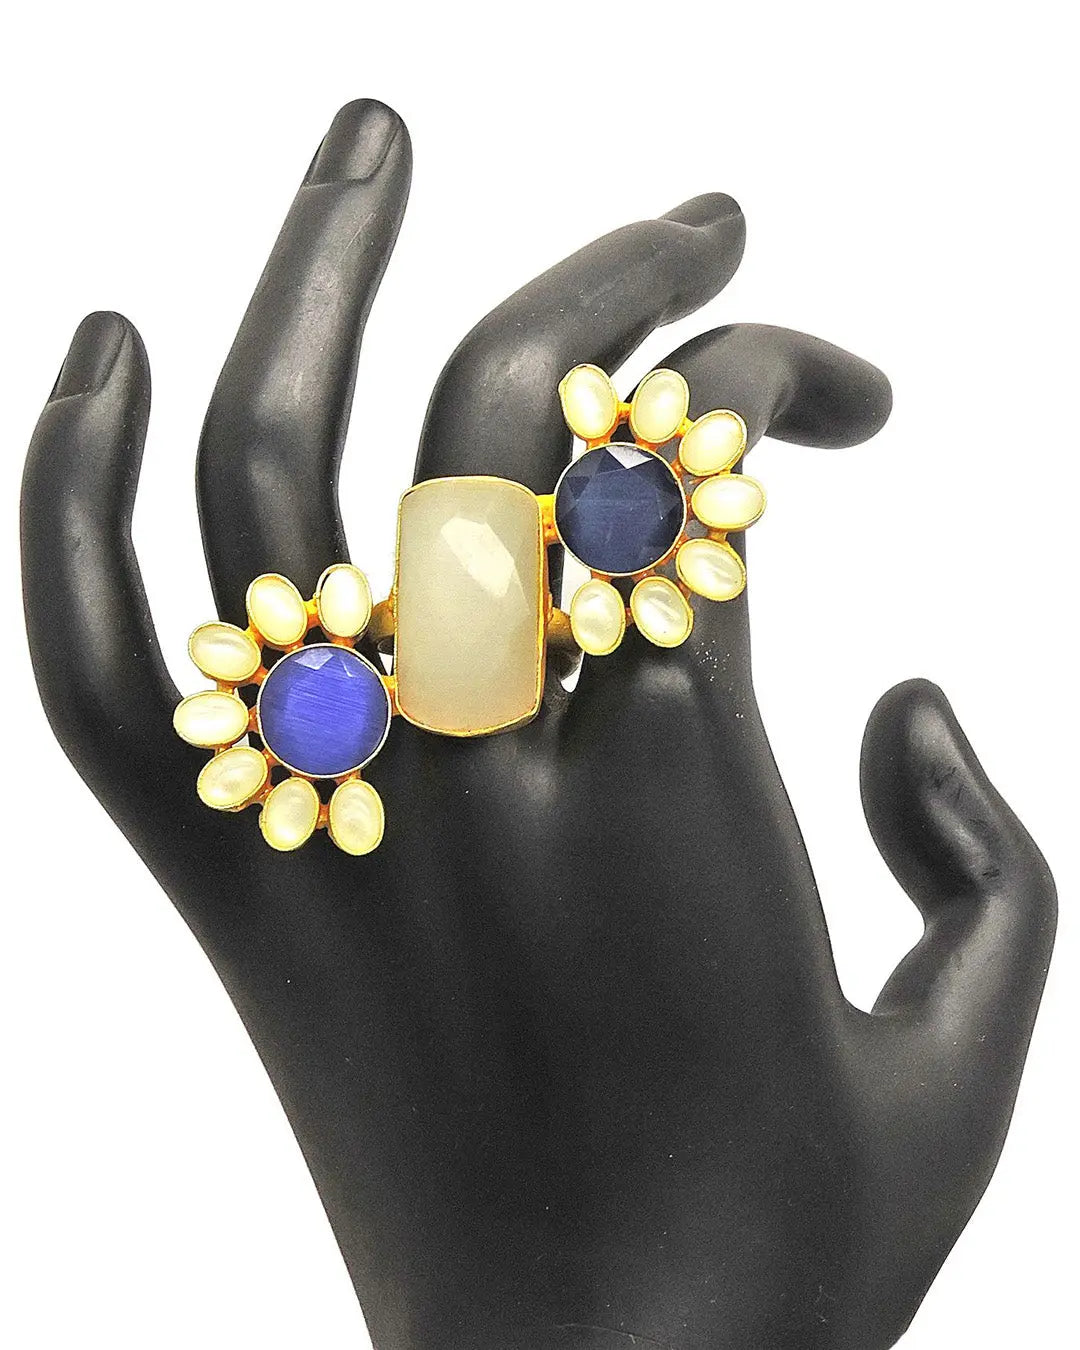 Isabella Ring- Handcrafted Jewellery from Dori